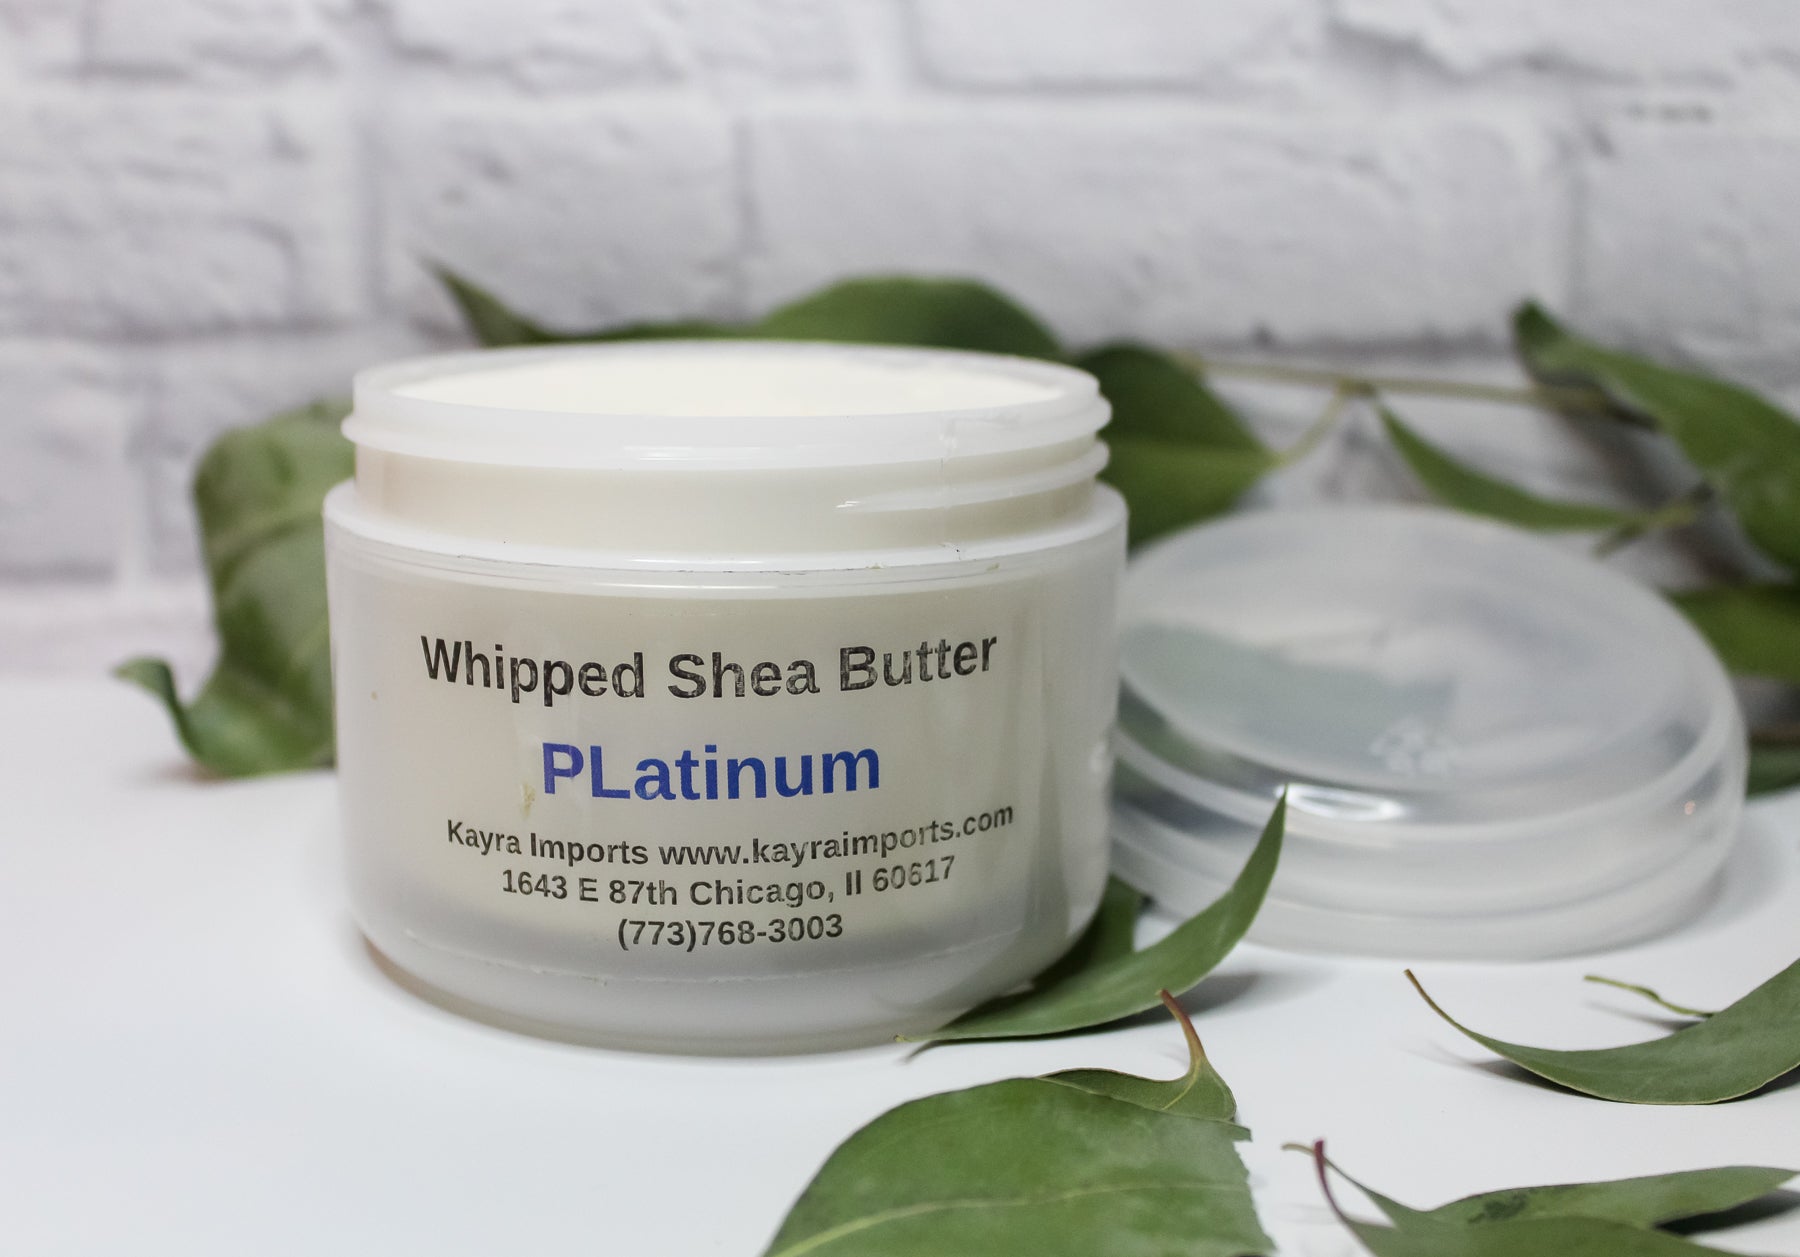 Platinum Whipped Shea Butter